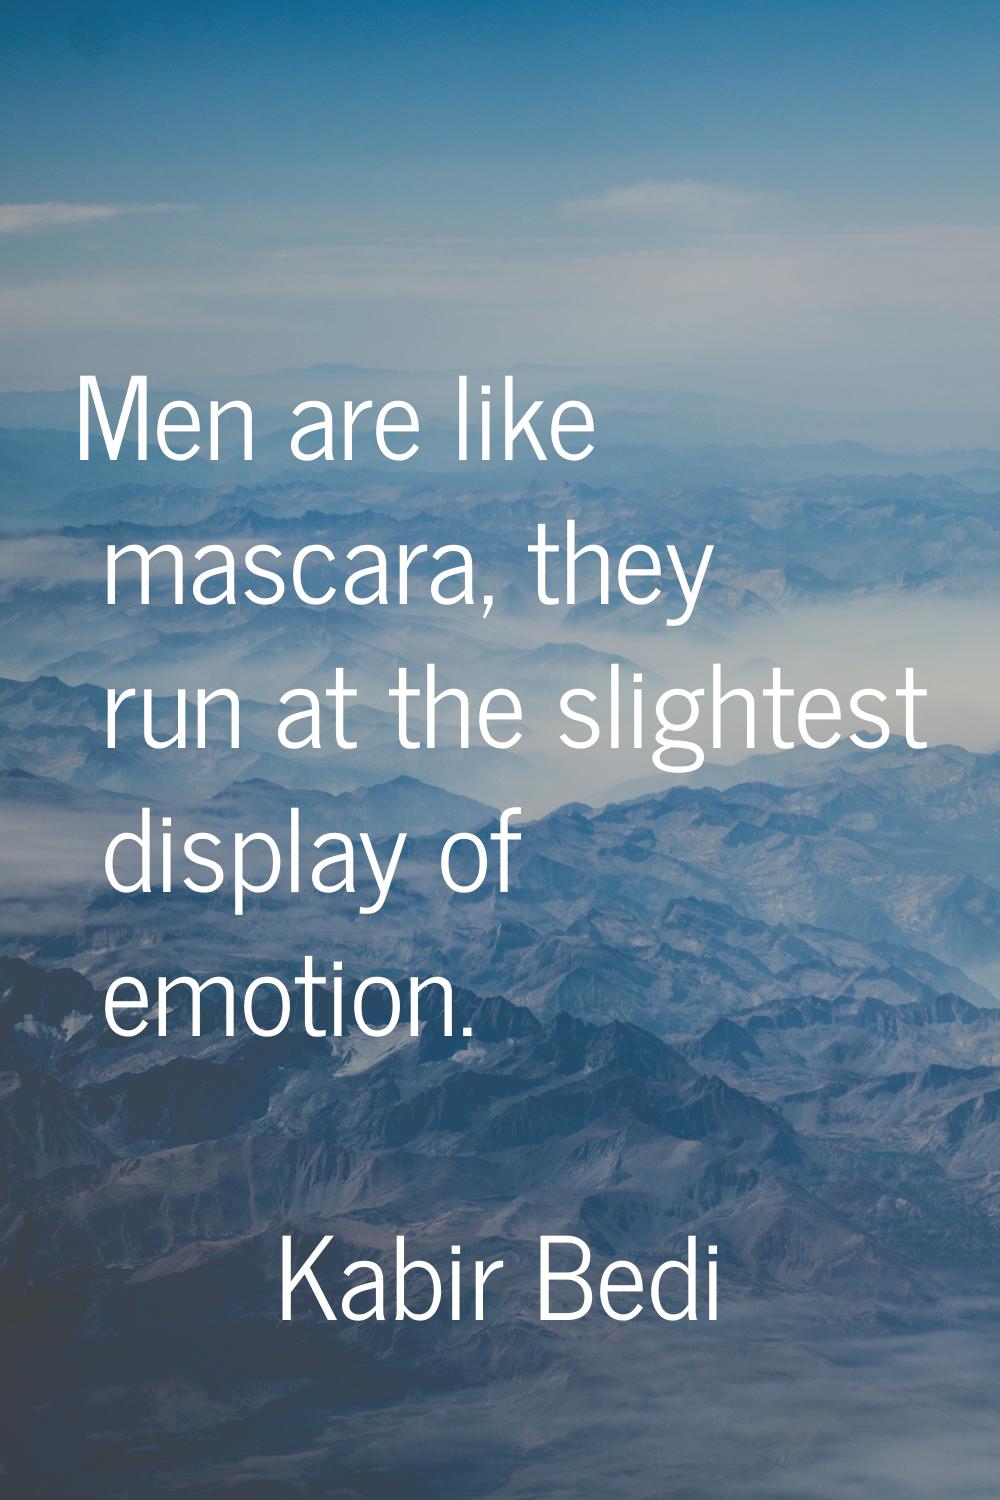 Men are like mascara, they run at the slightest display of emotion.